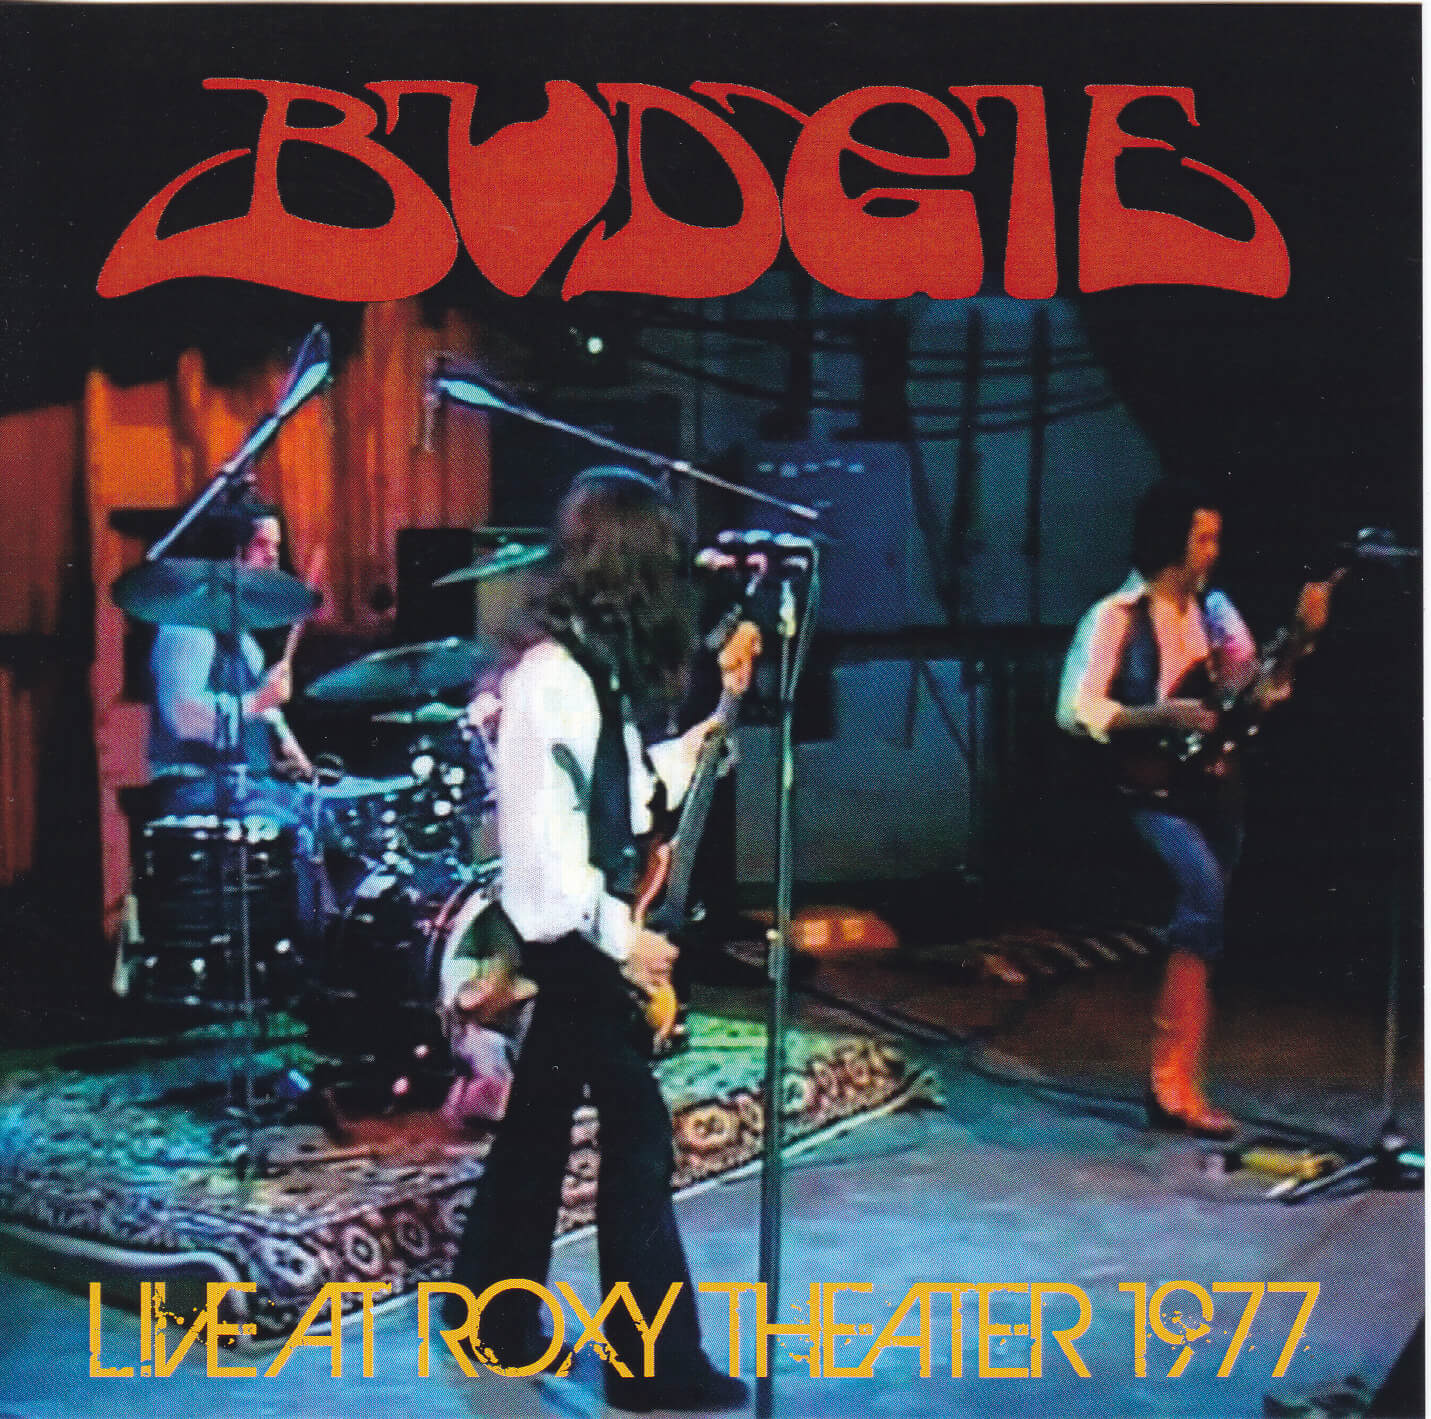 Budgie / Live At Roxy Theater 1977 / 1CDR – GiGinJapan